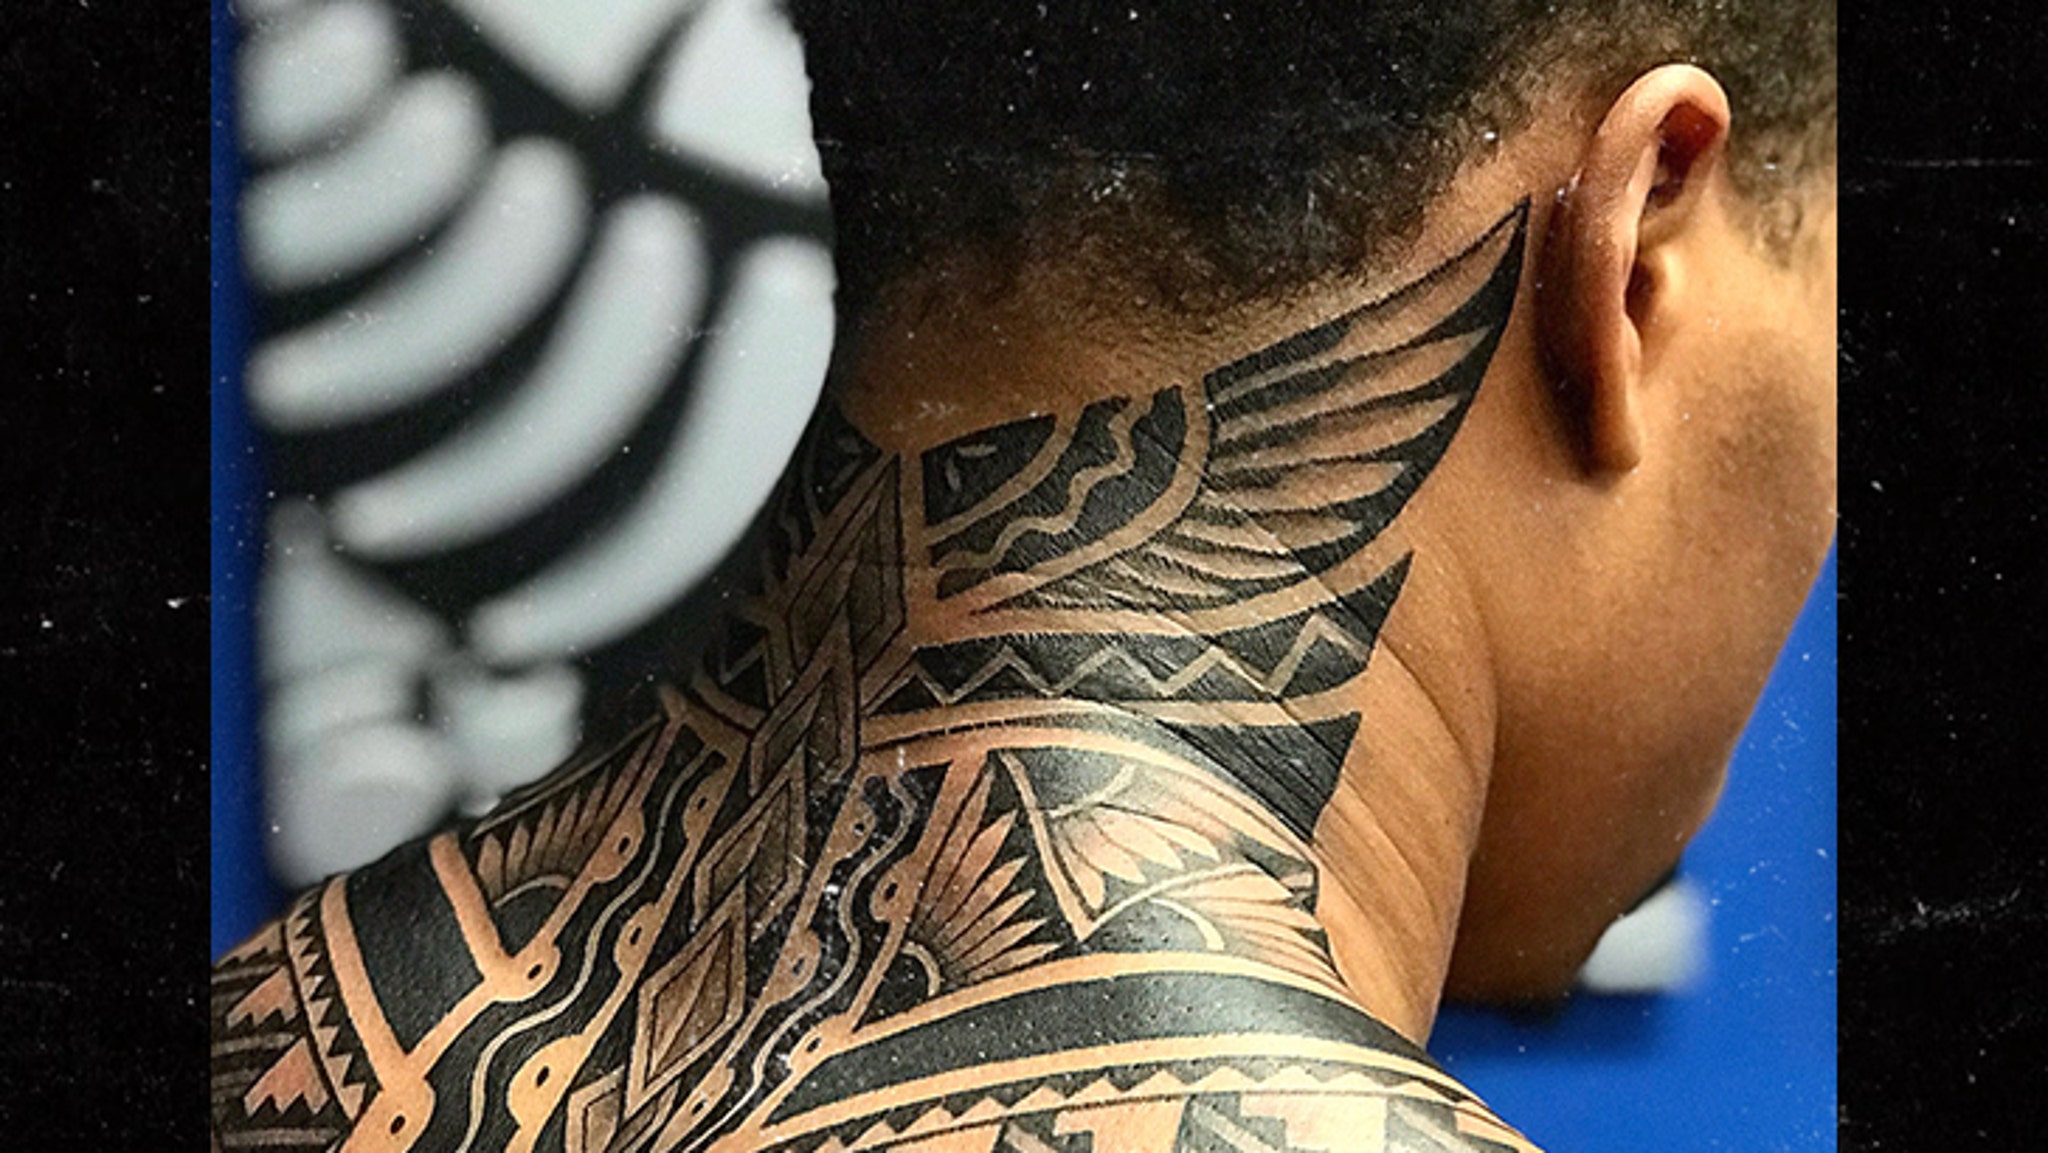 Who is the most tattooed football player? - Quora